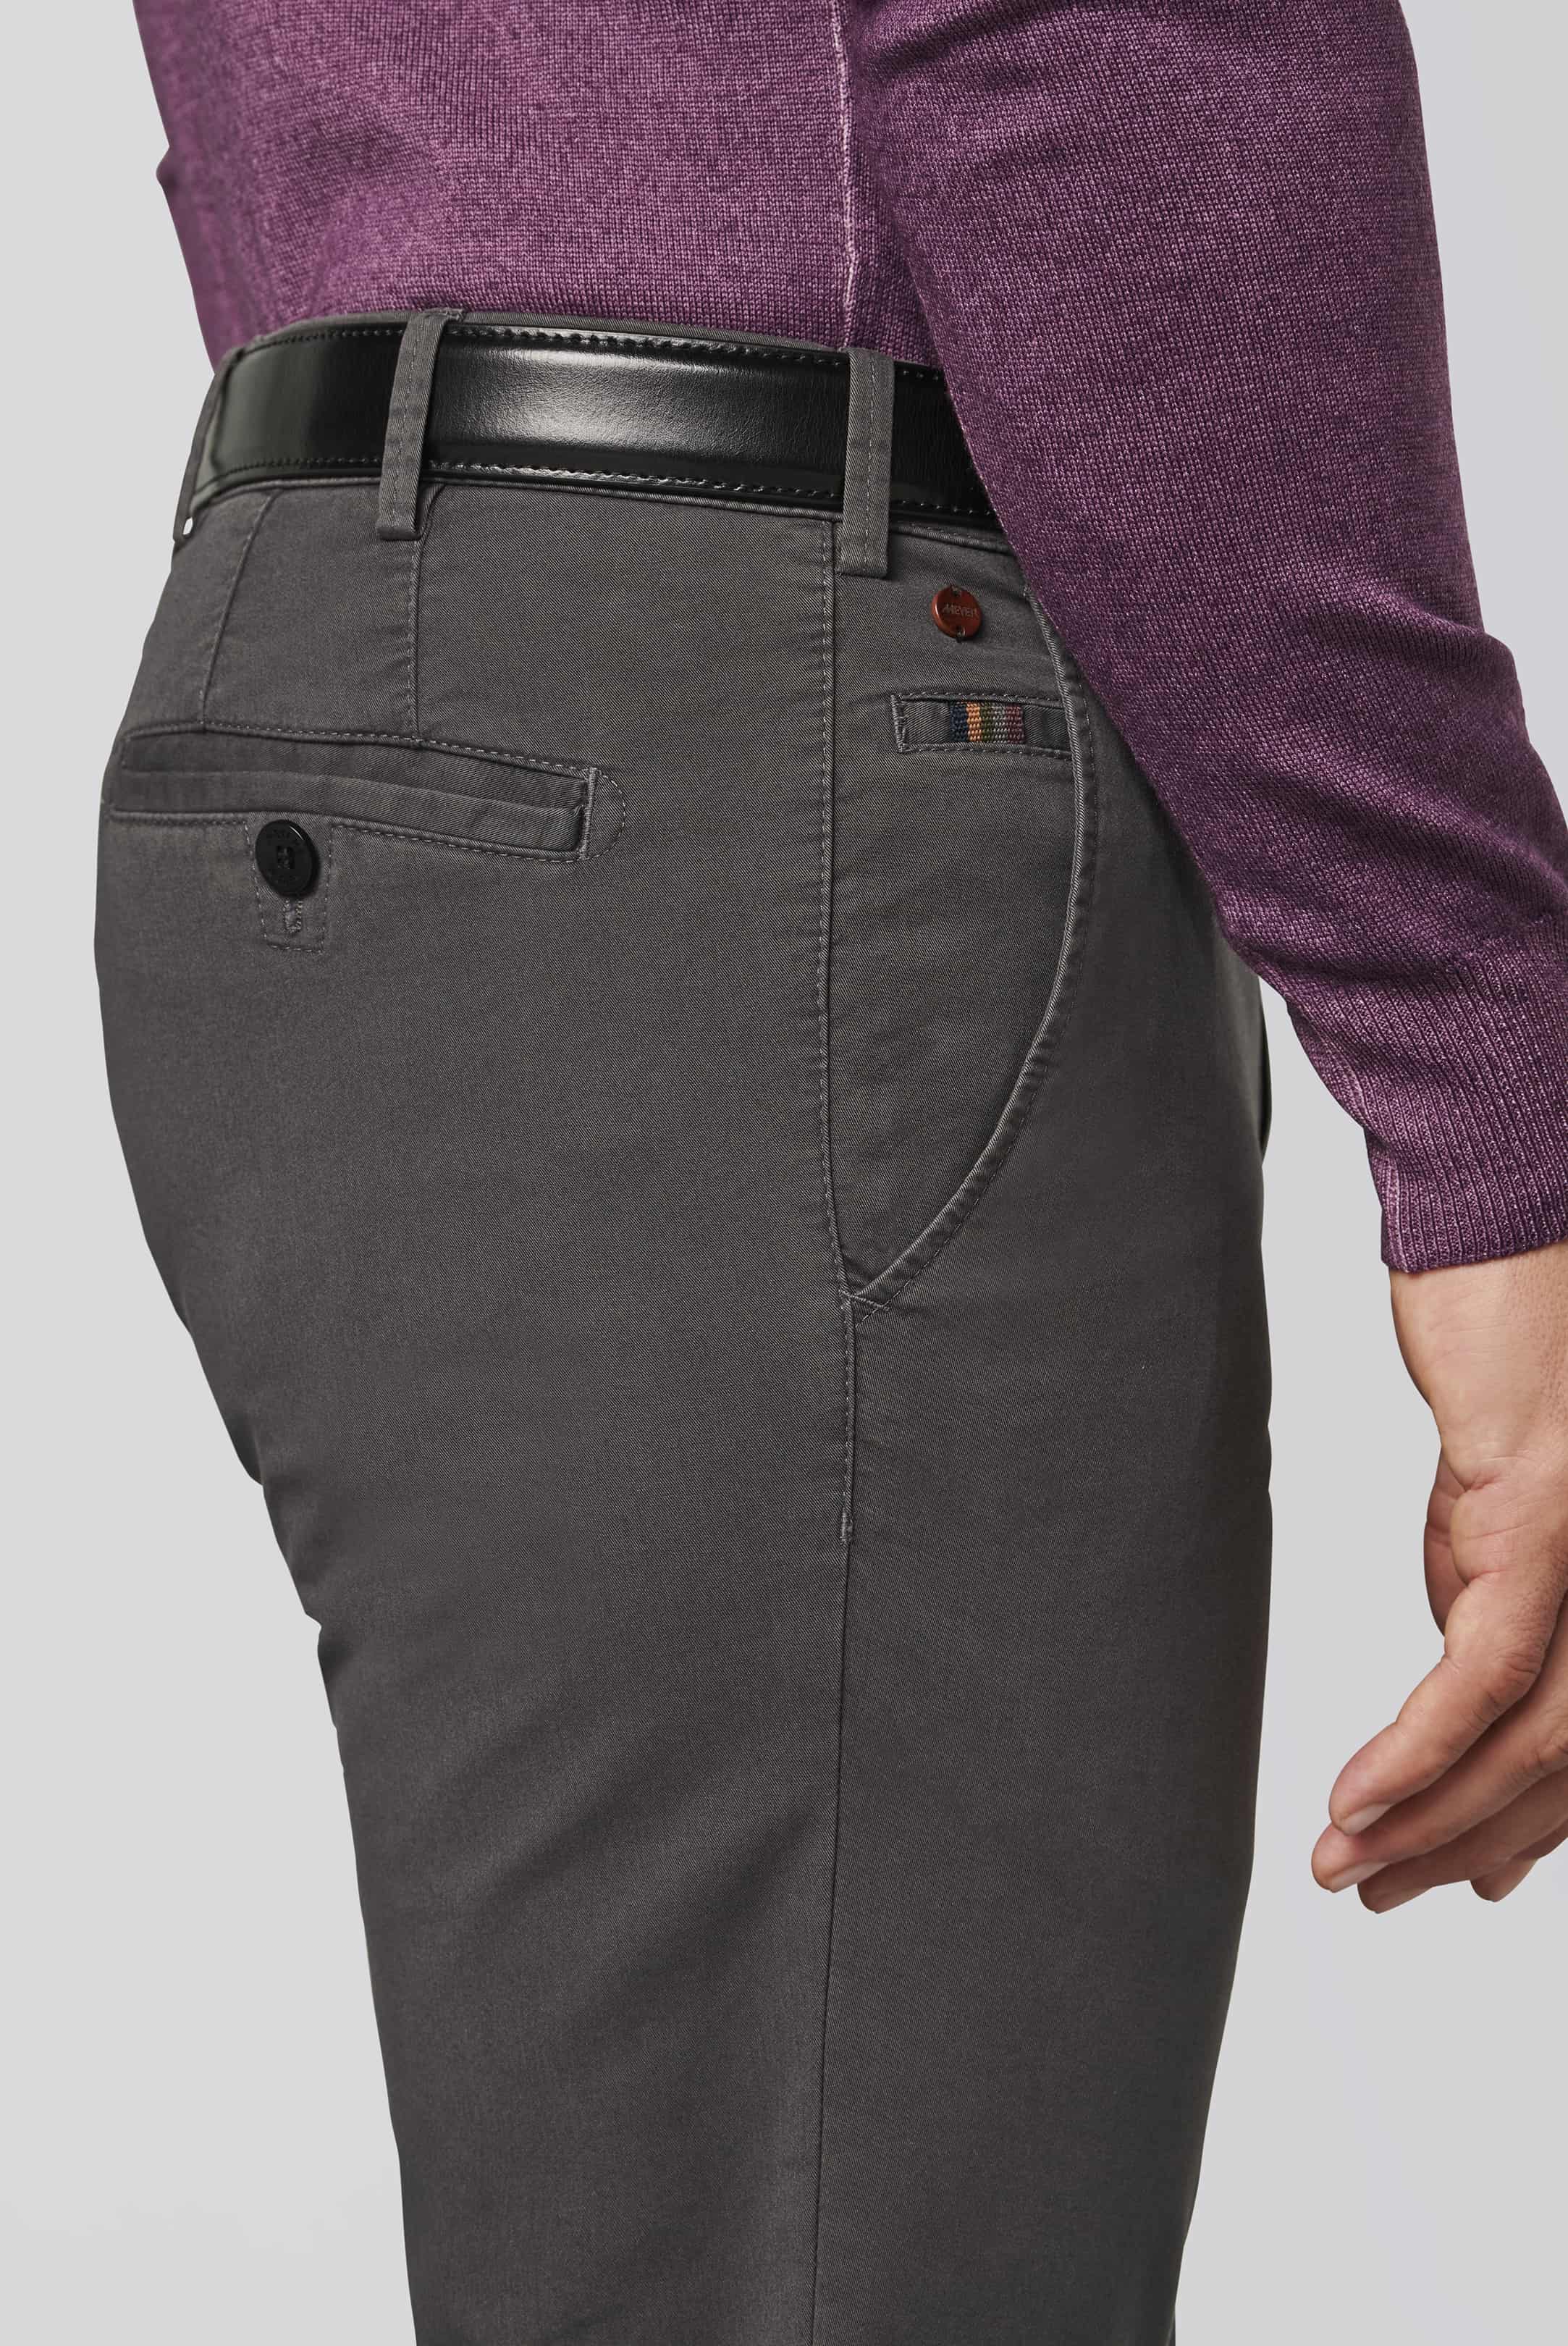 40% OFF MEYER Trousers - Roma 316 Luxury Cotton Chinos - Charcoal - Size 30 REG